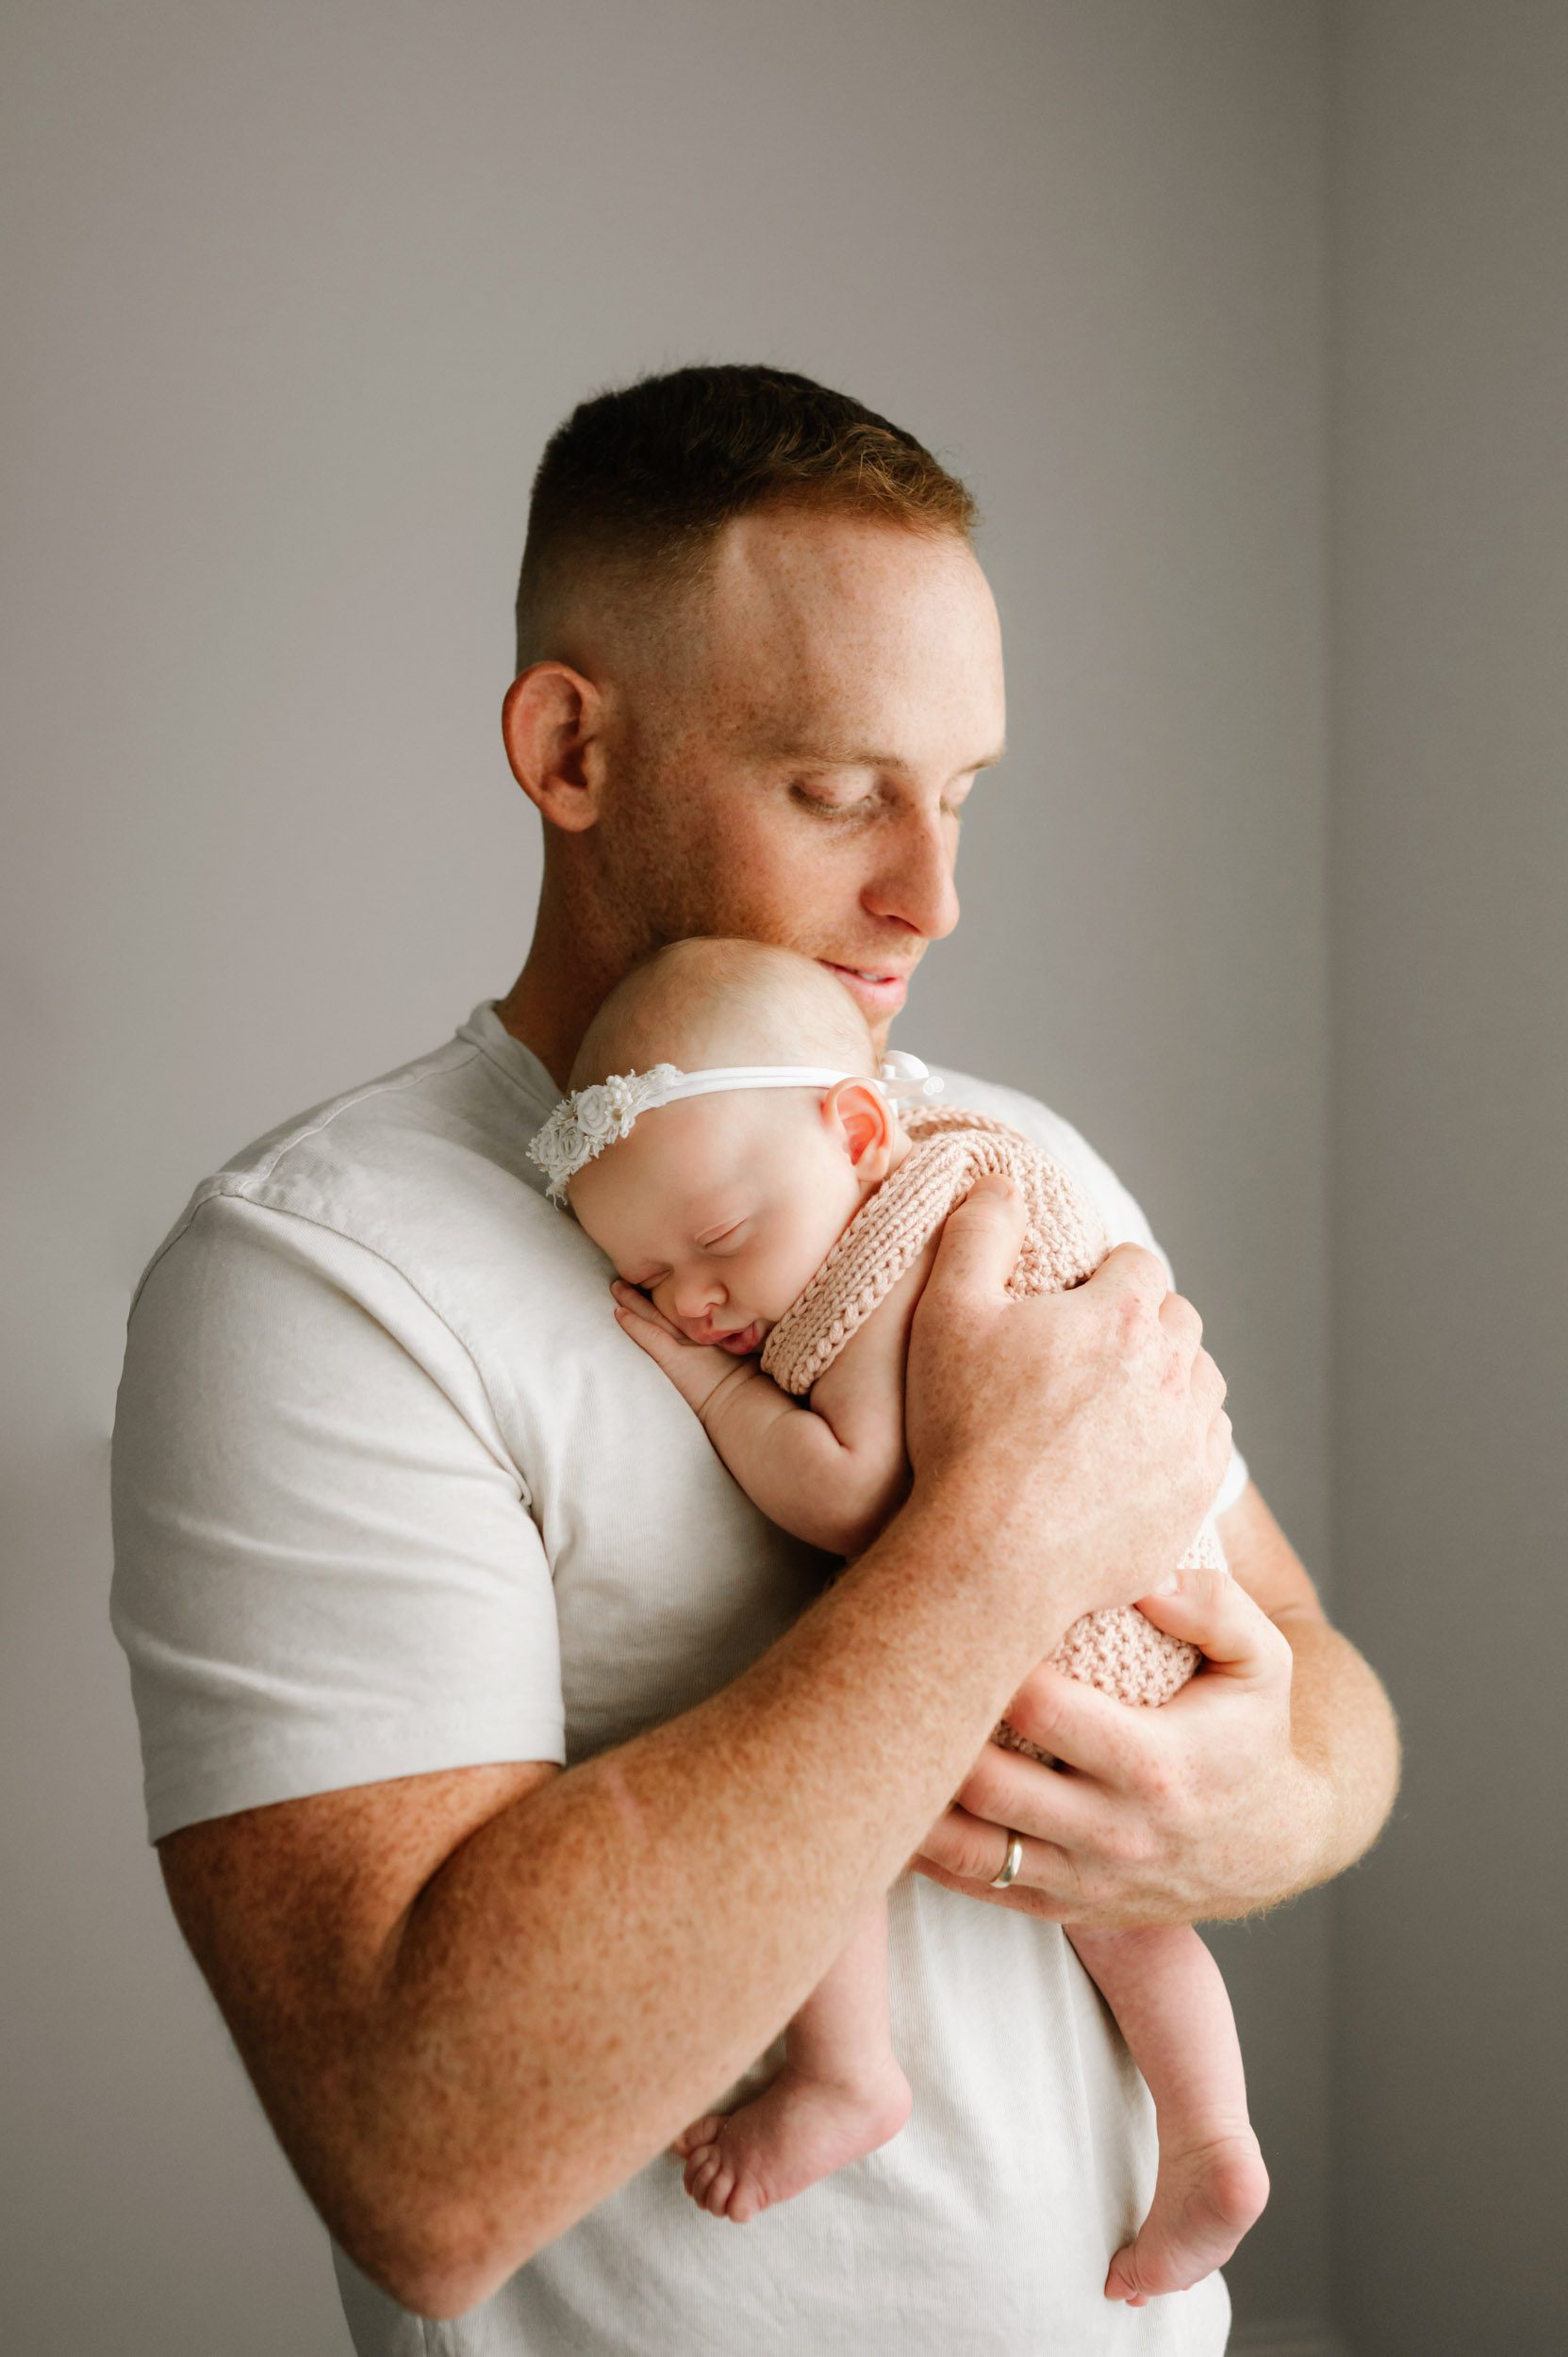 a baby girl snuggled up against her dad's chest and sleeping peacefully during an in home newborn photography session